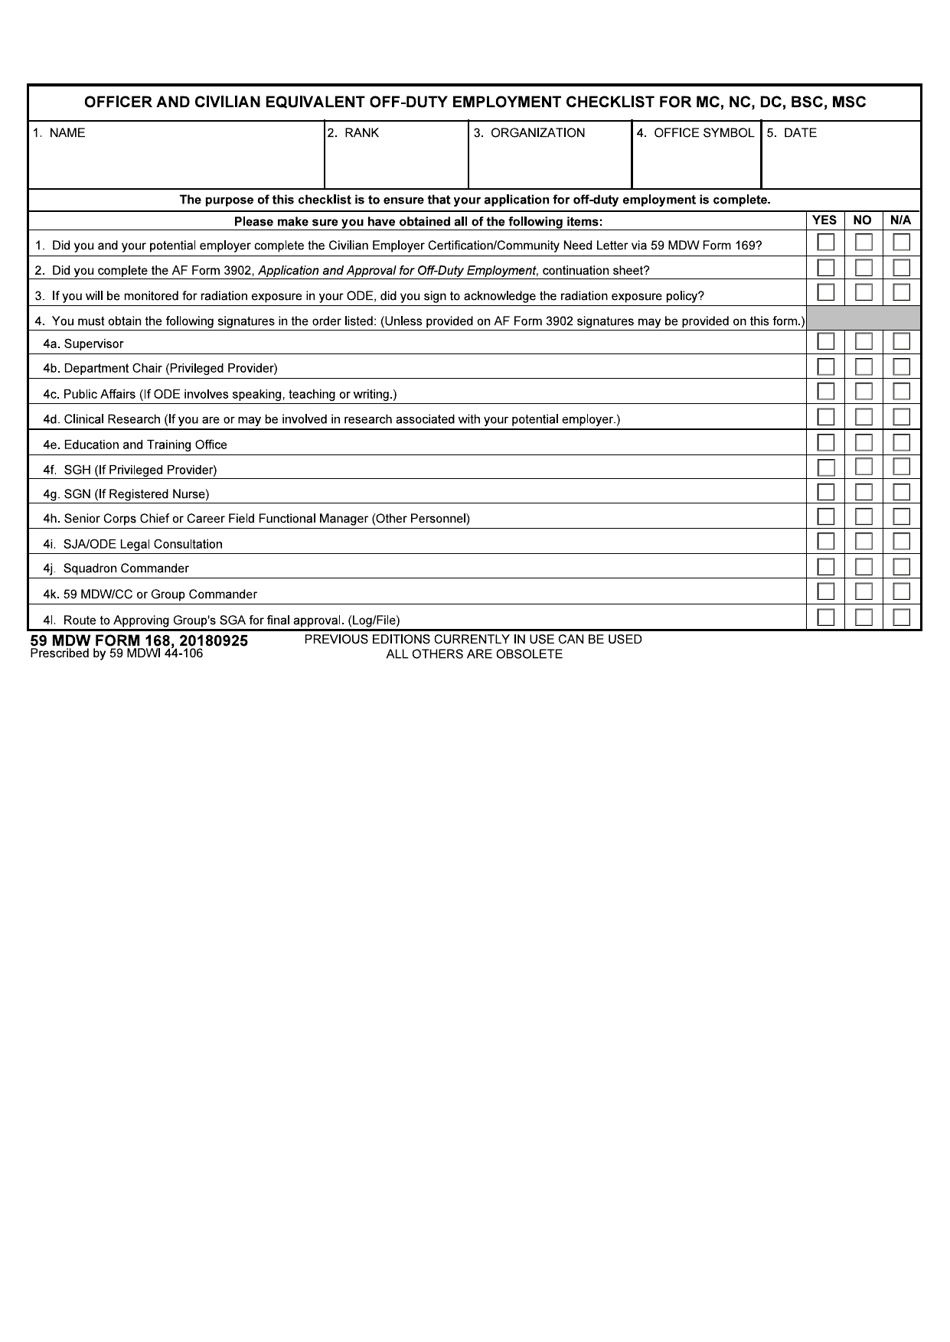 59 MDW Form 168 Officer and Civilian Equivalent off-Duty Employment Checklist for Mc, Nc, Dc, Bsc, Msc, Page 1